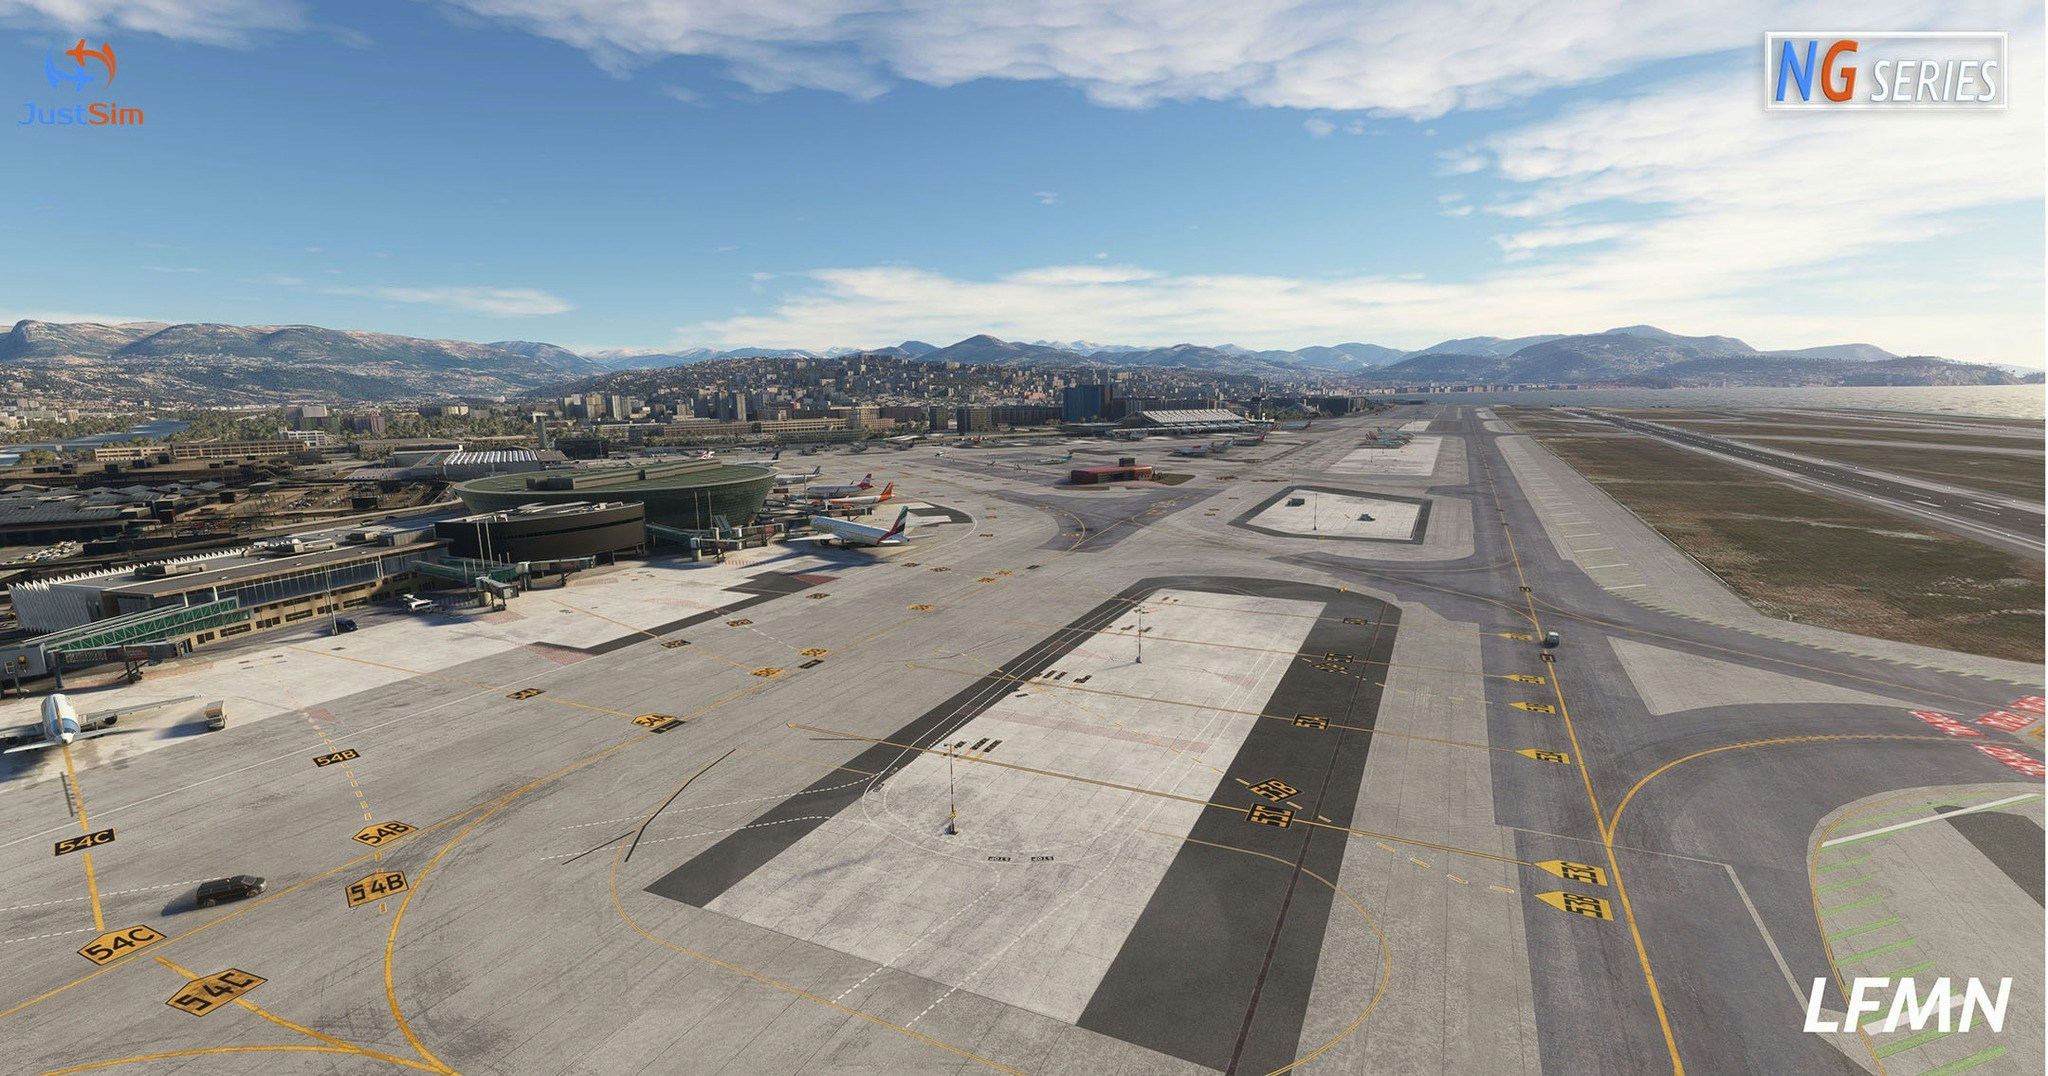 JustSim Announces "NG Series" Product Line, Releases Cote d'Azur Airport for MSFS